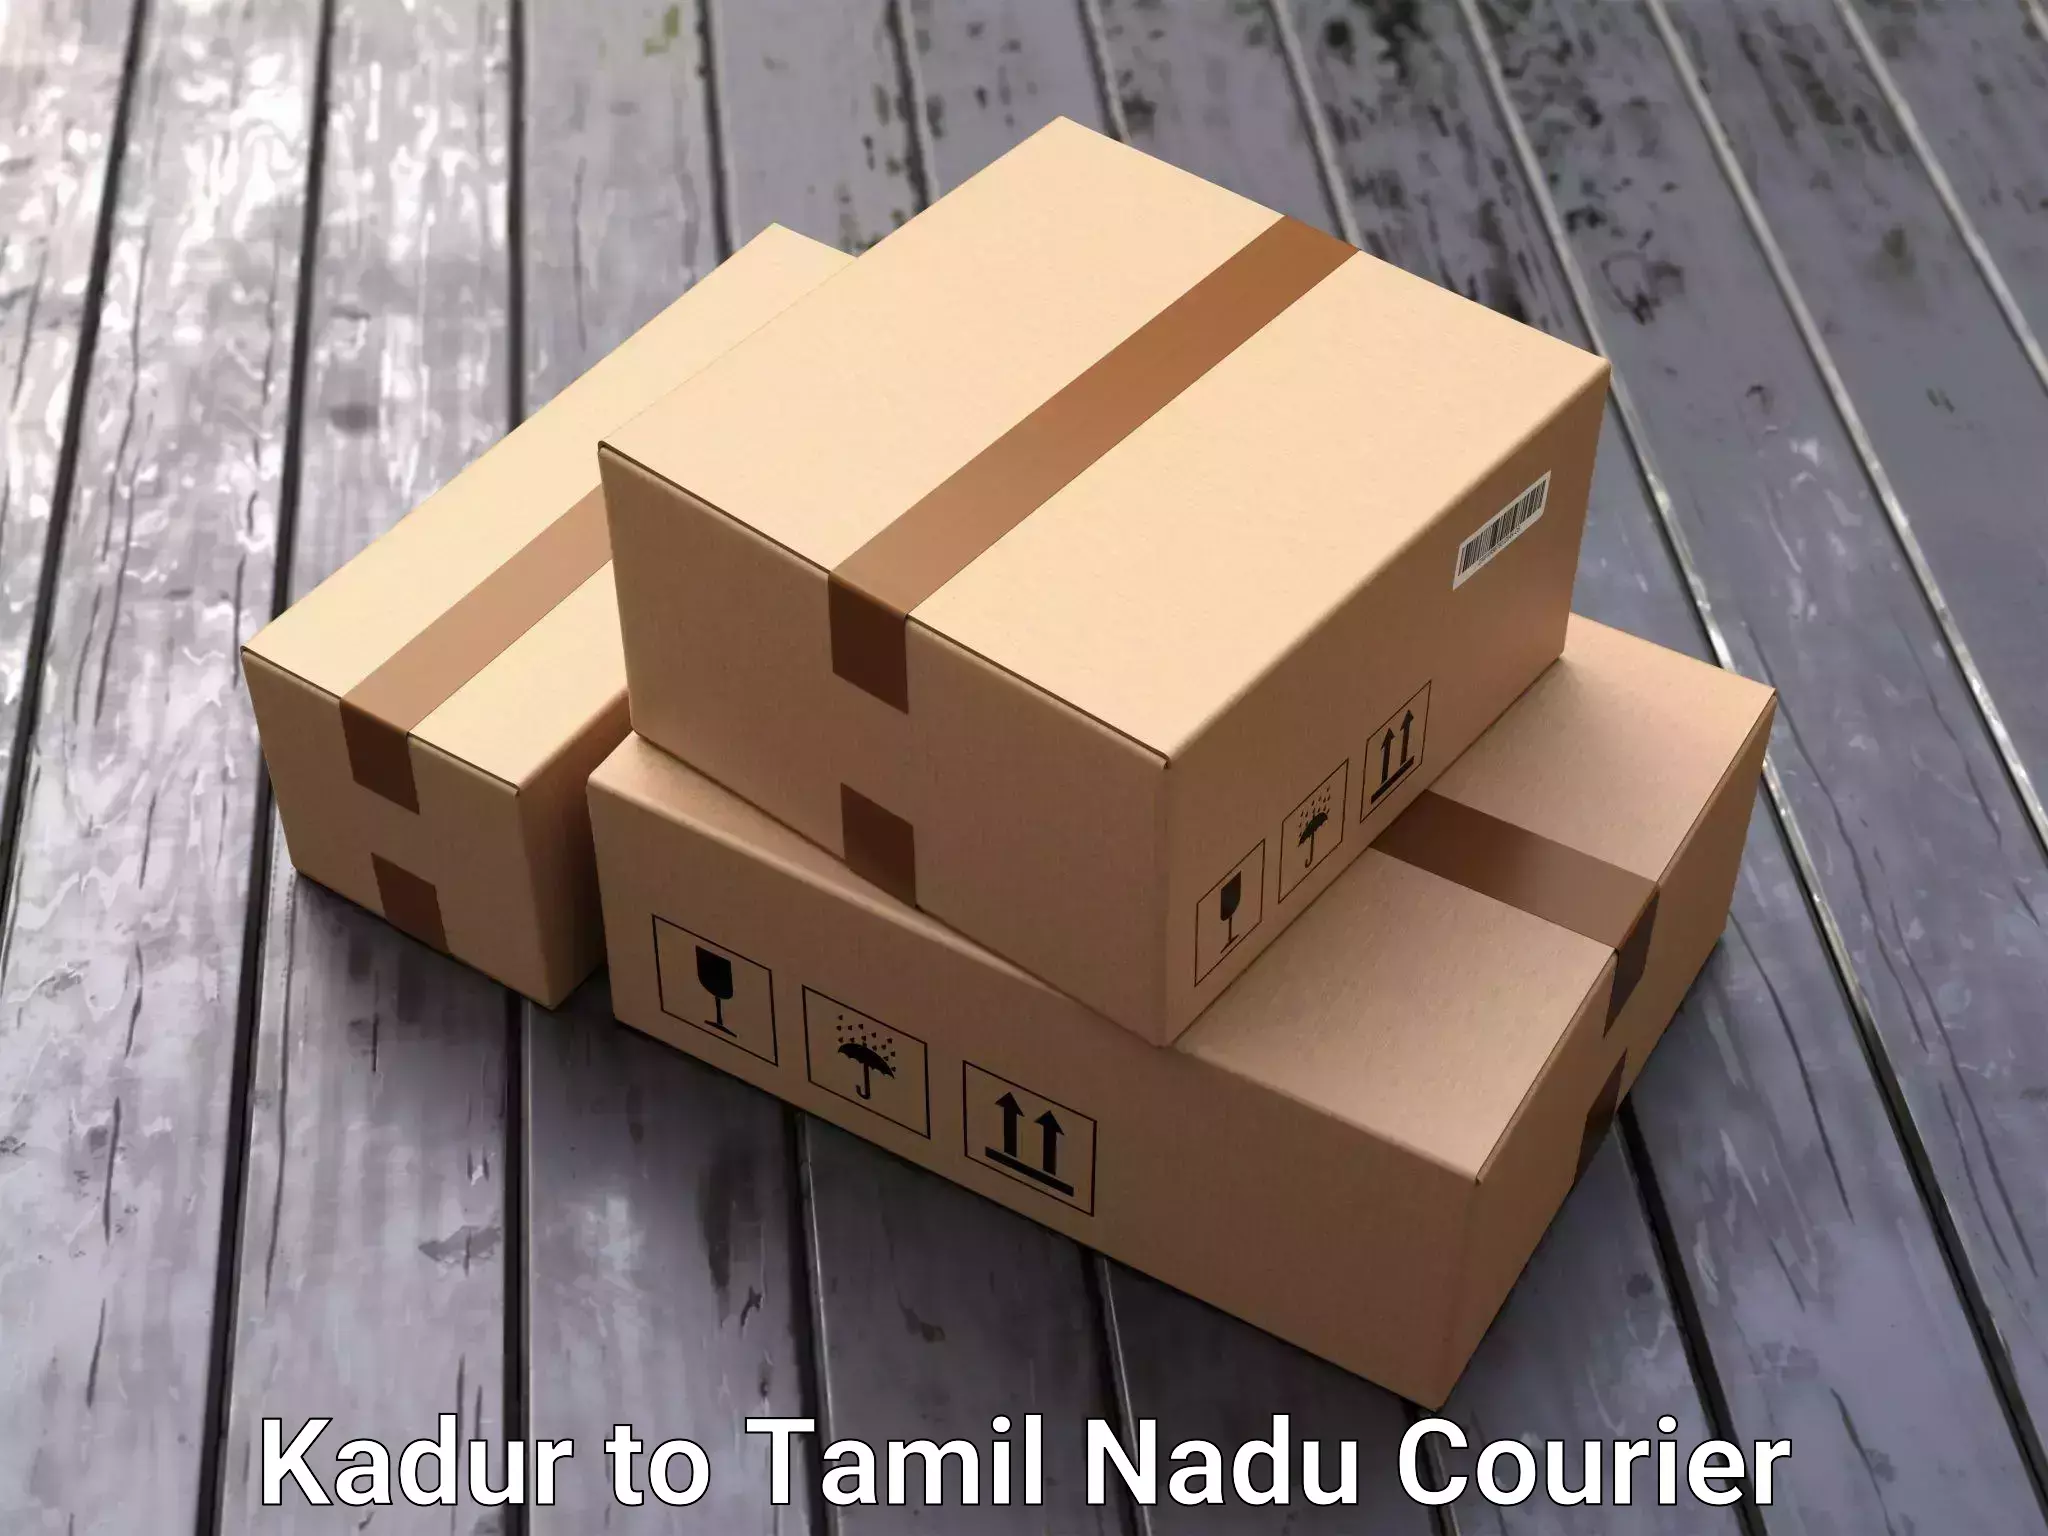 Furniture transport service Kadur to SRM Institute of Science and Technology Chennai